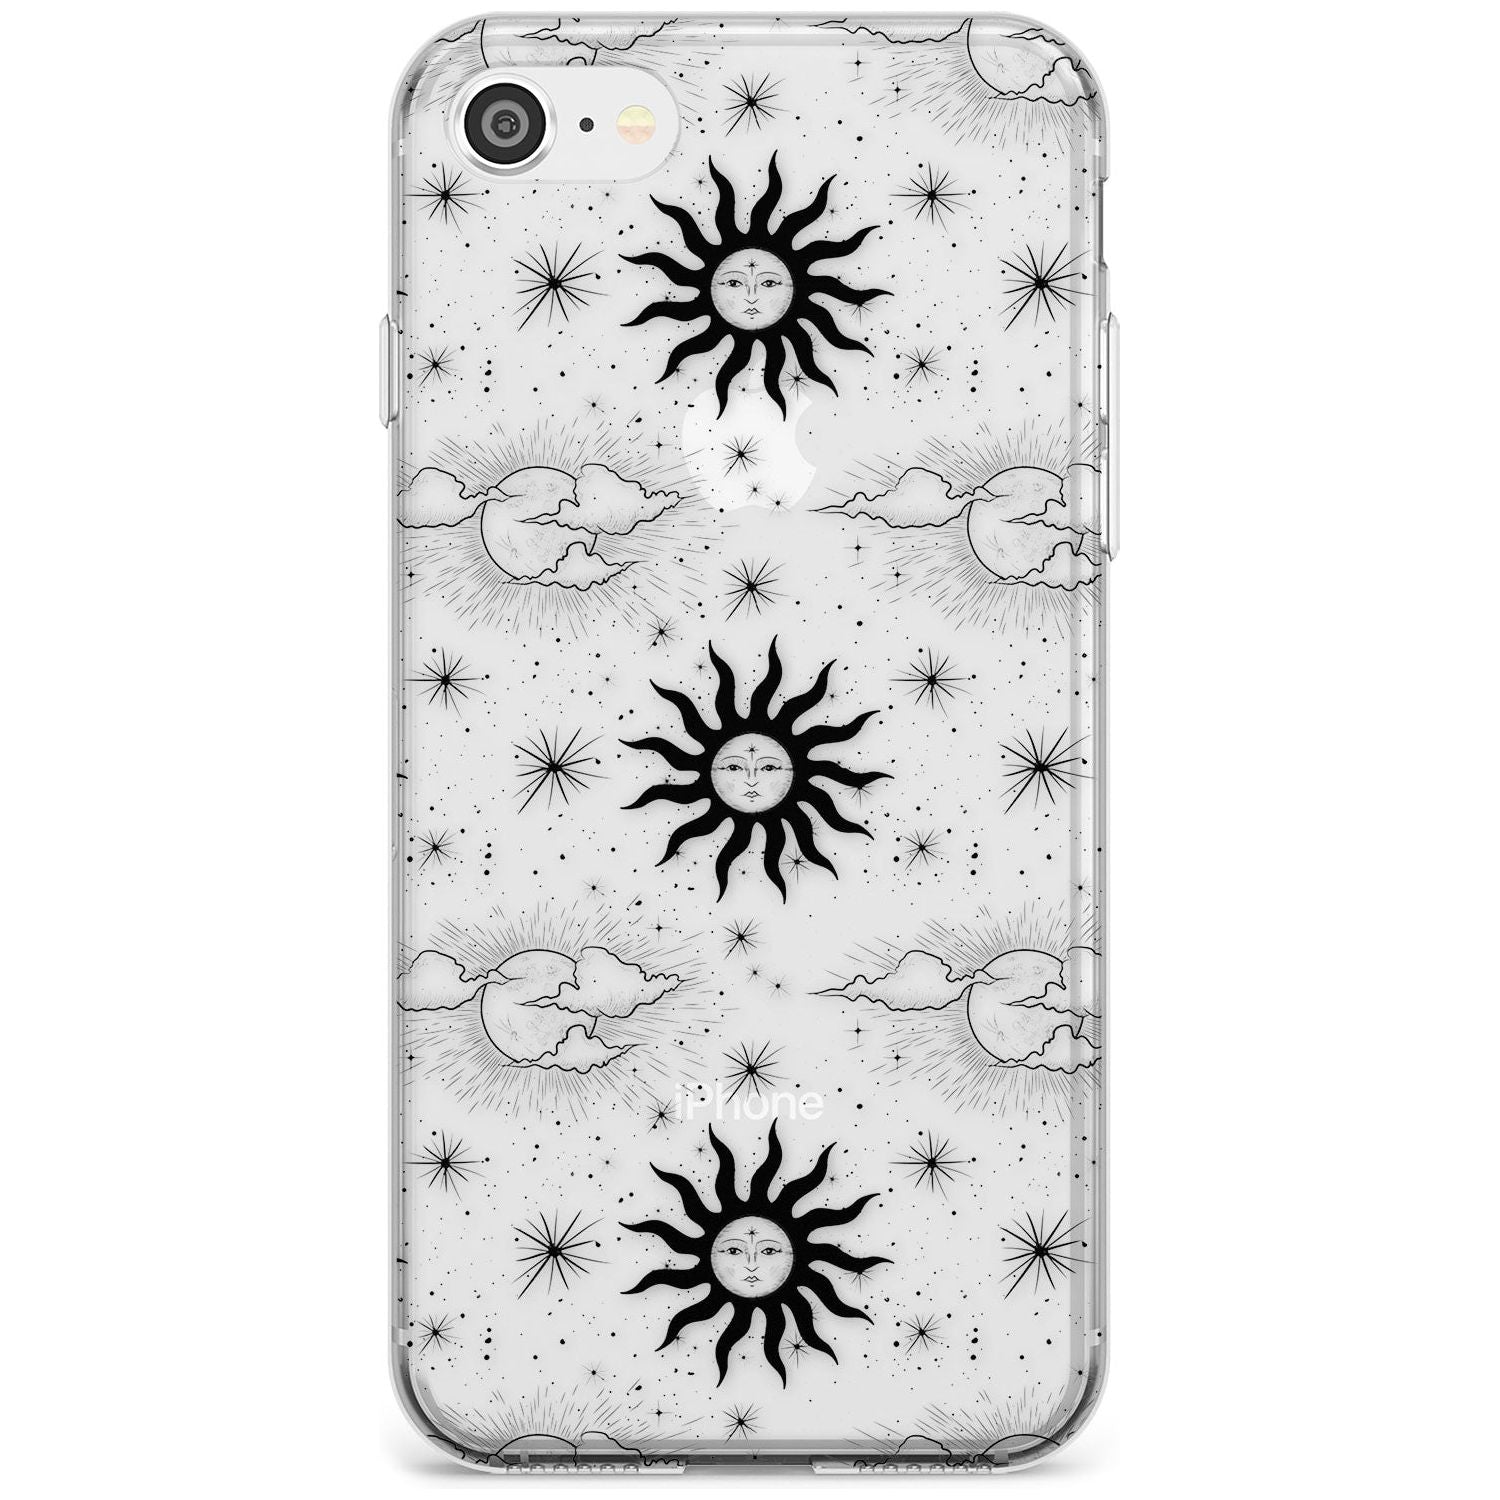 Suns & Clouds Vintage Astrological Slim TPU Phone Case for iPhone SE 8 7 Plus